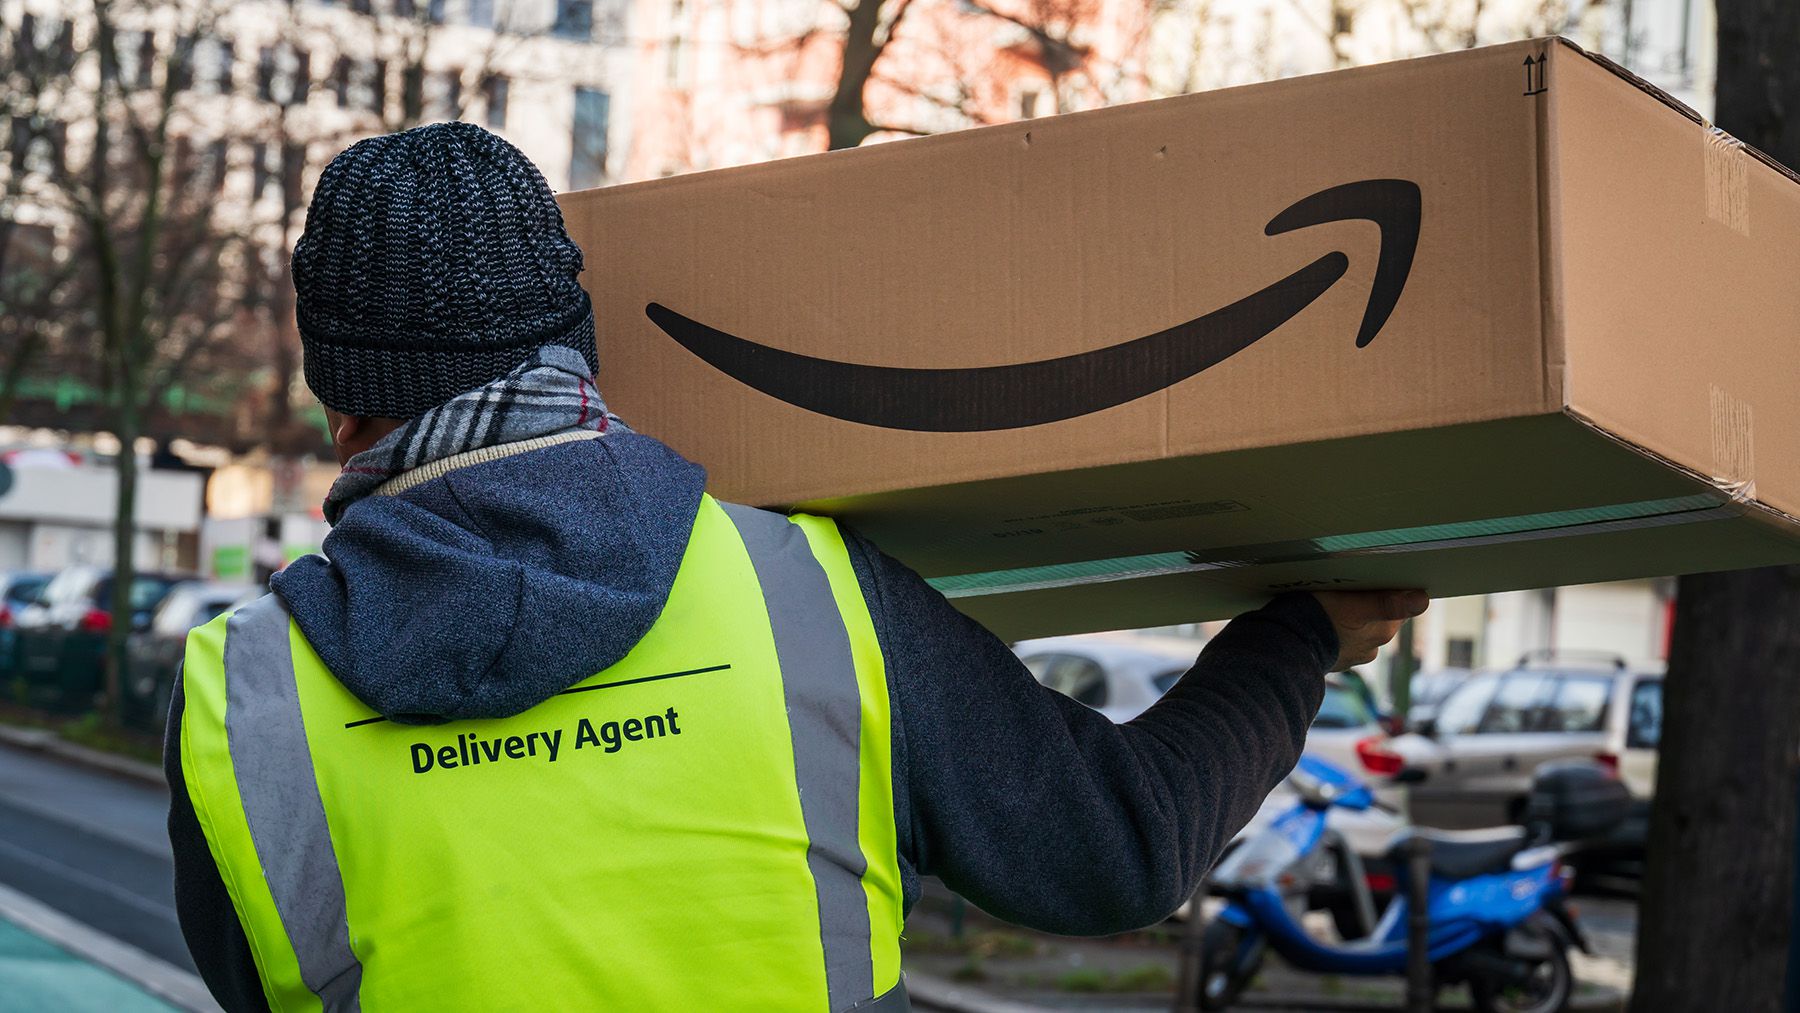 Amazon Analysts Expect Same-Day Delivery to Boost Margins in Q3